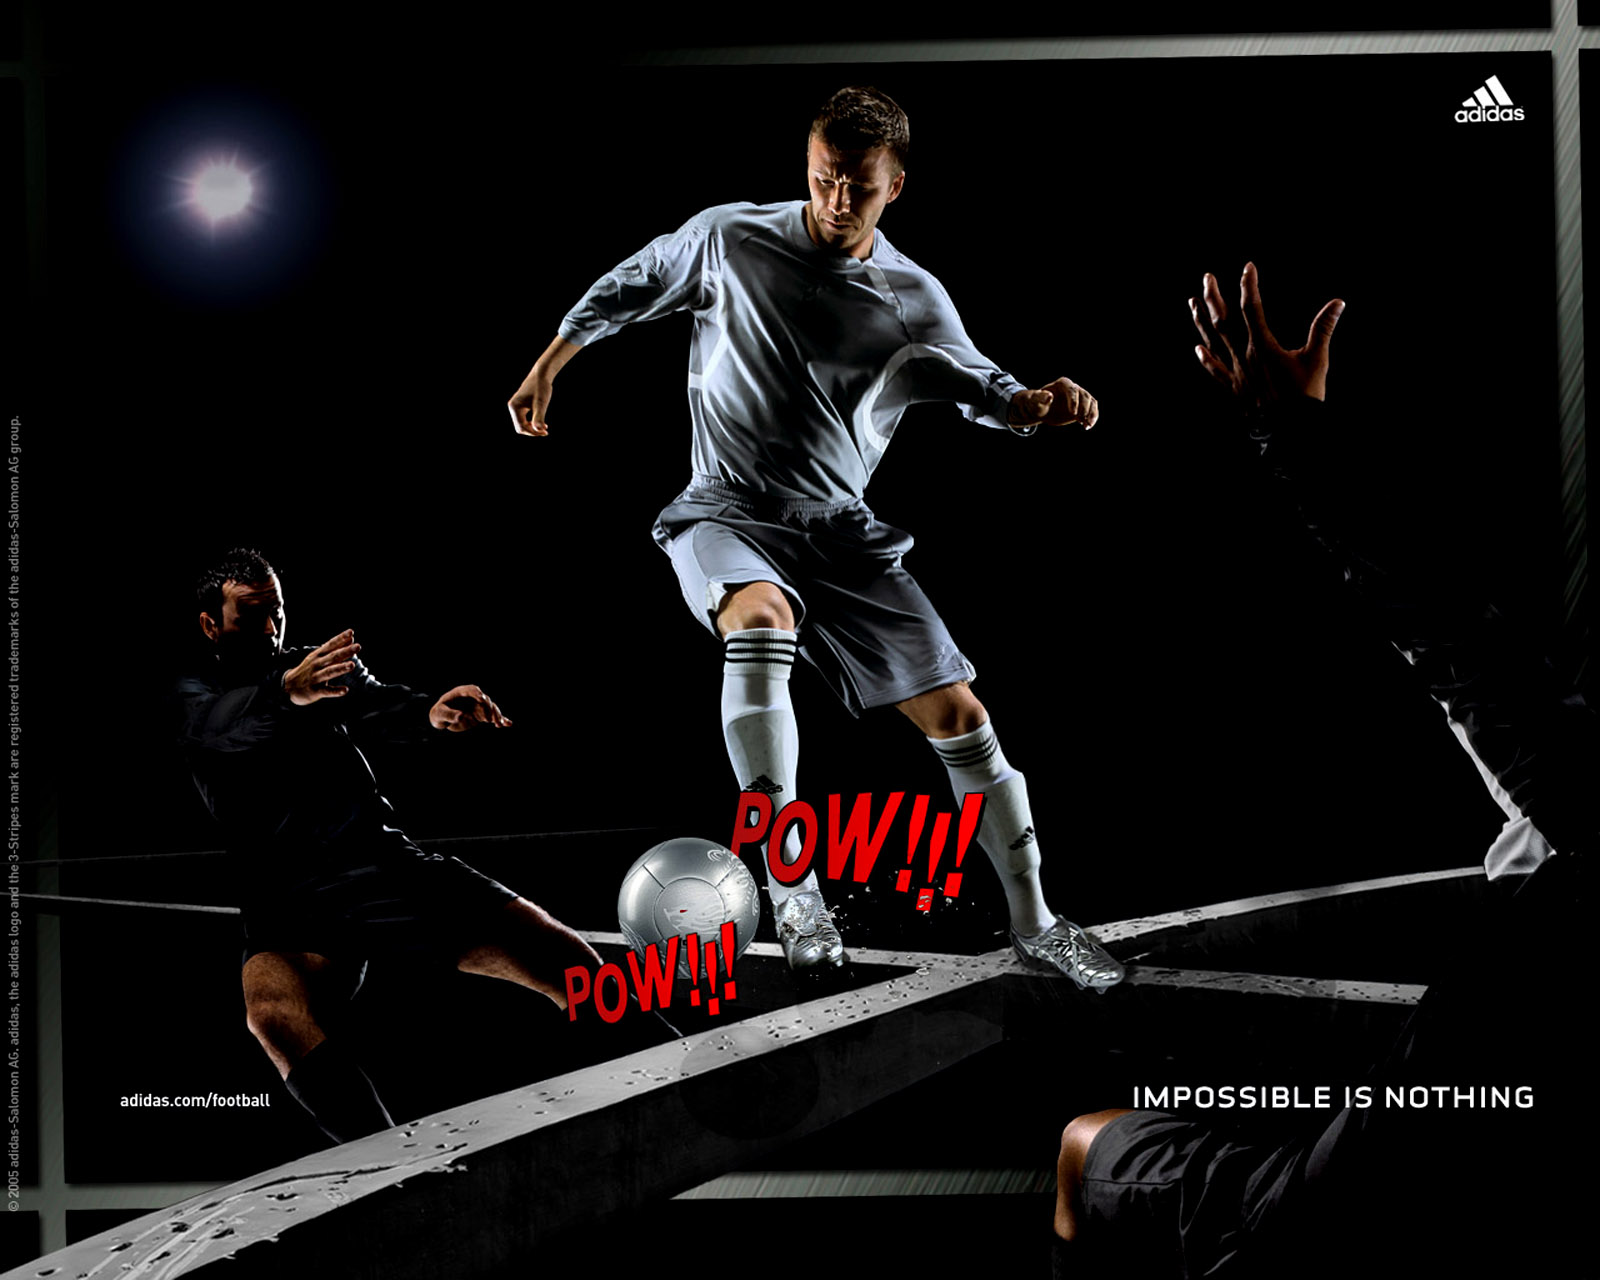 Adidas Impossible is Nothing Ads HD Wallpapers| HD ...